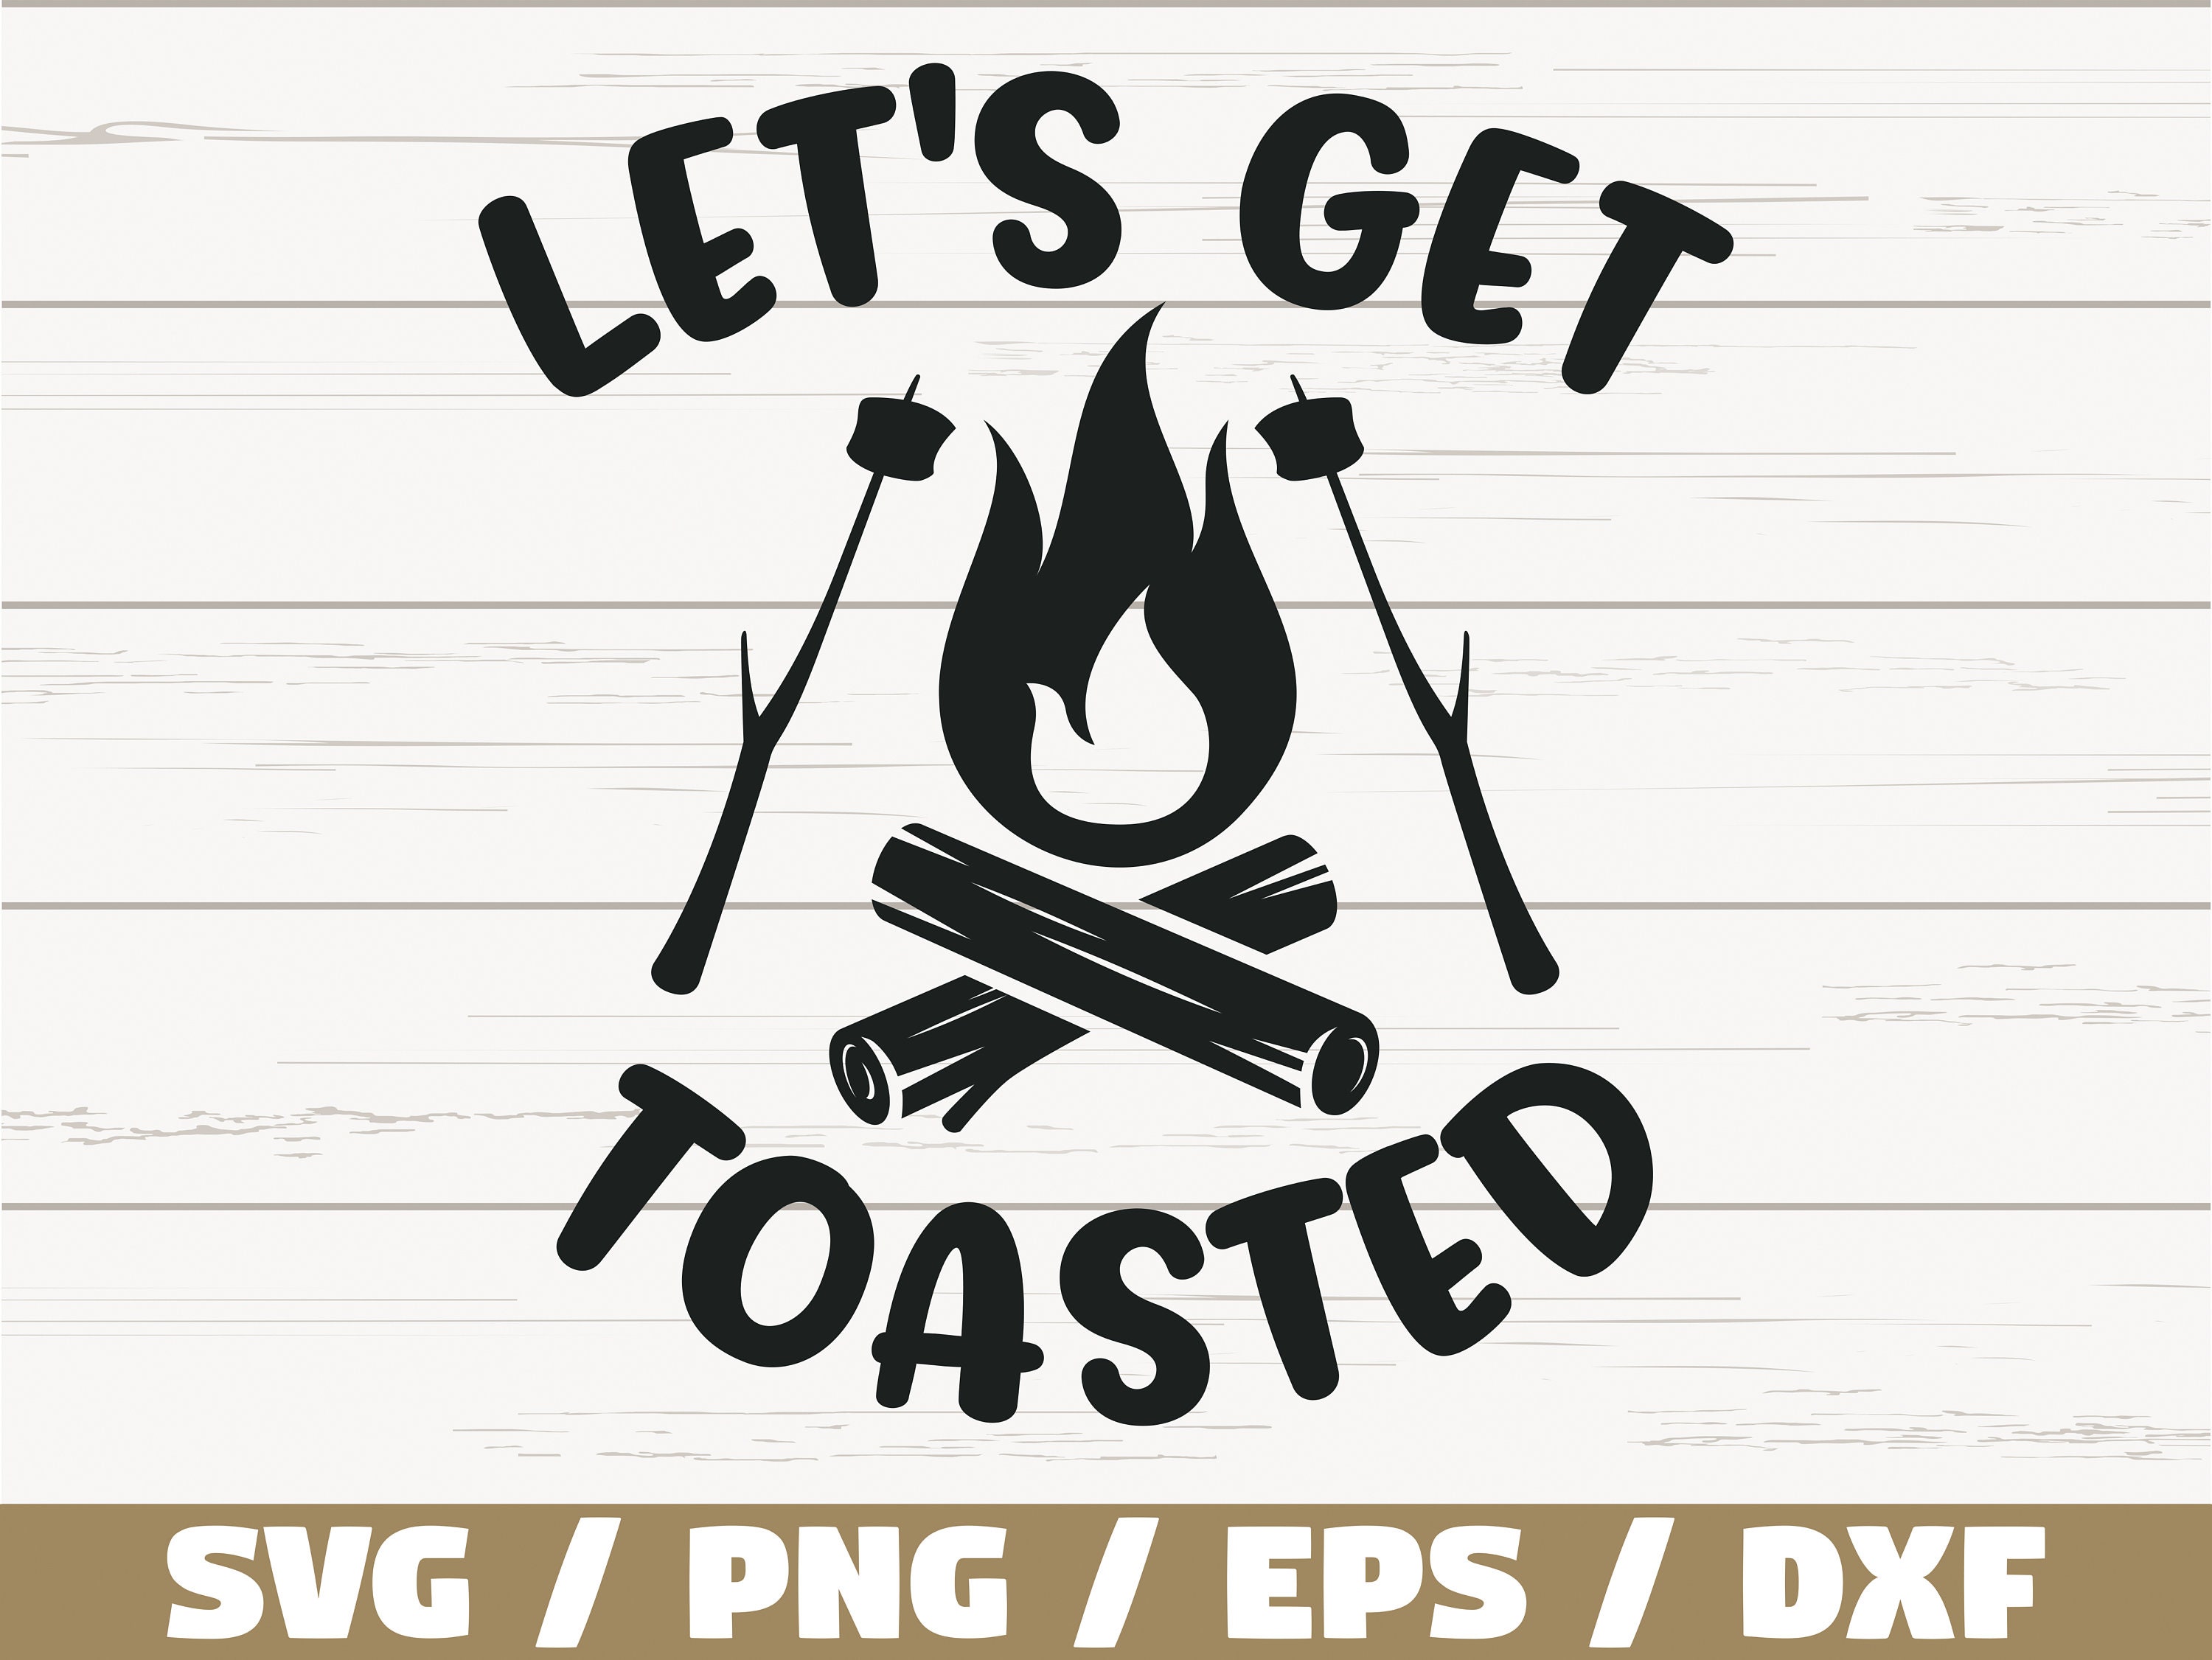 Let's Get Toasted SVG / Cut File / Cricut / Commercial use / Silhouett...